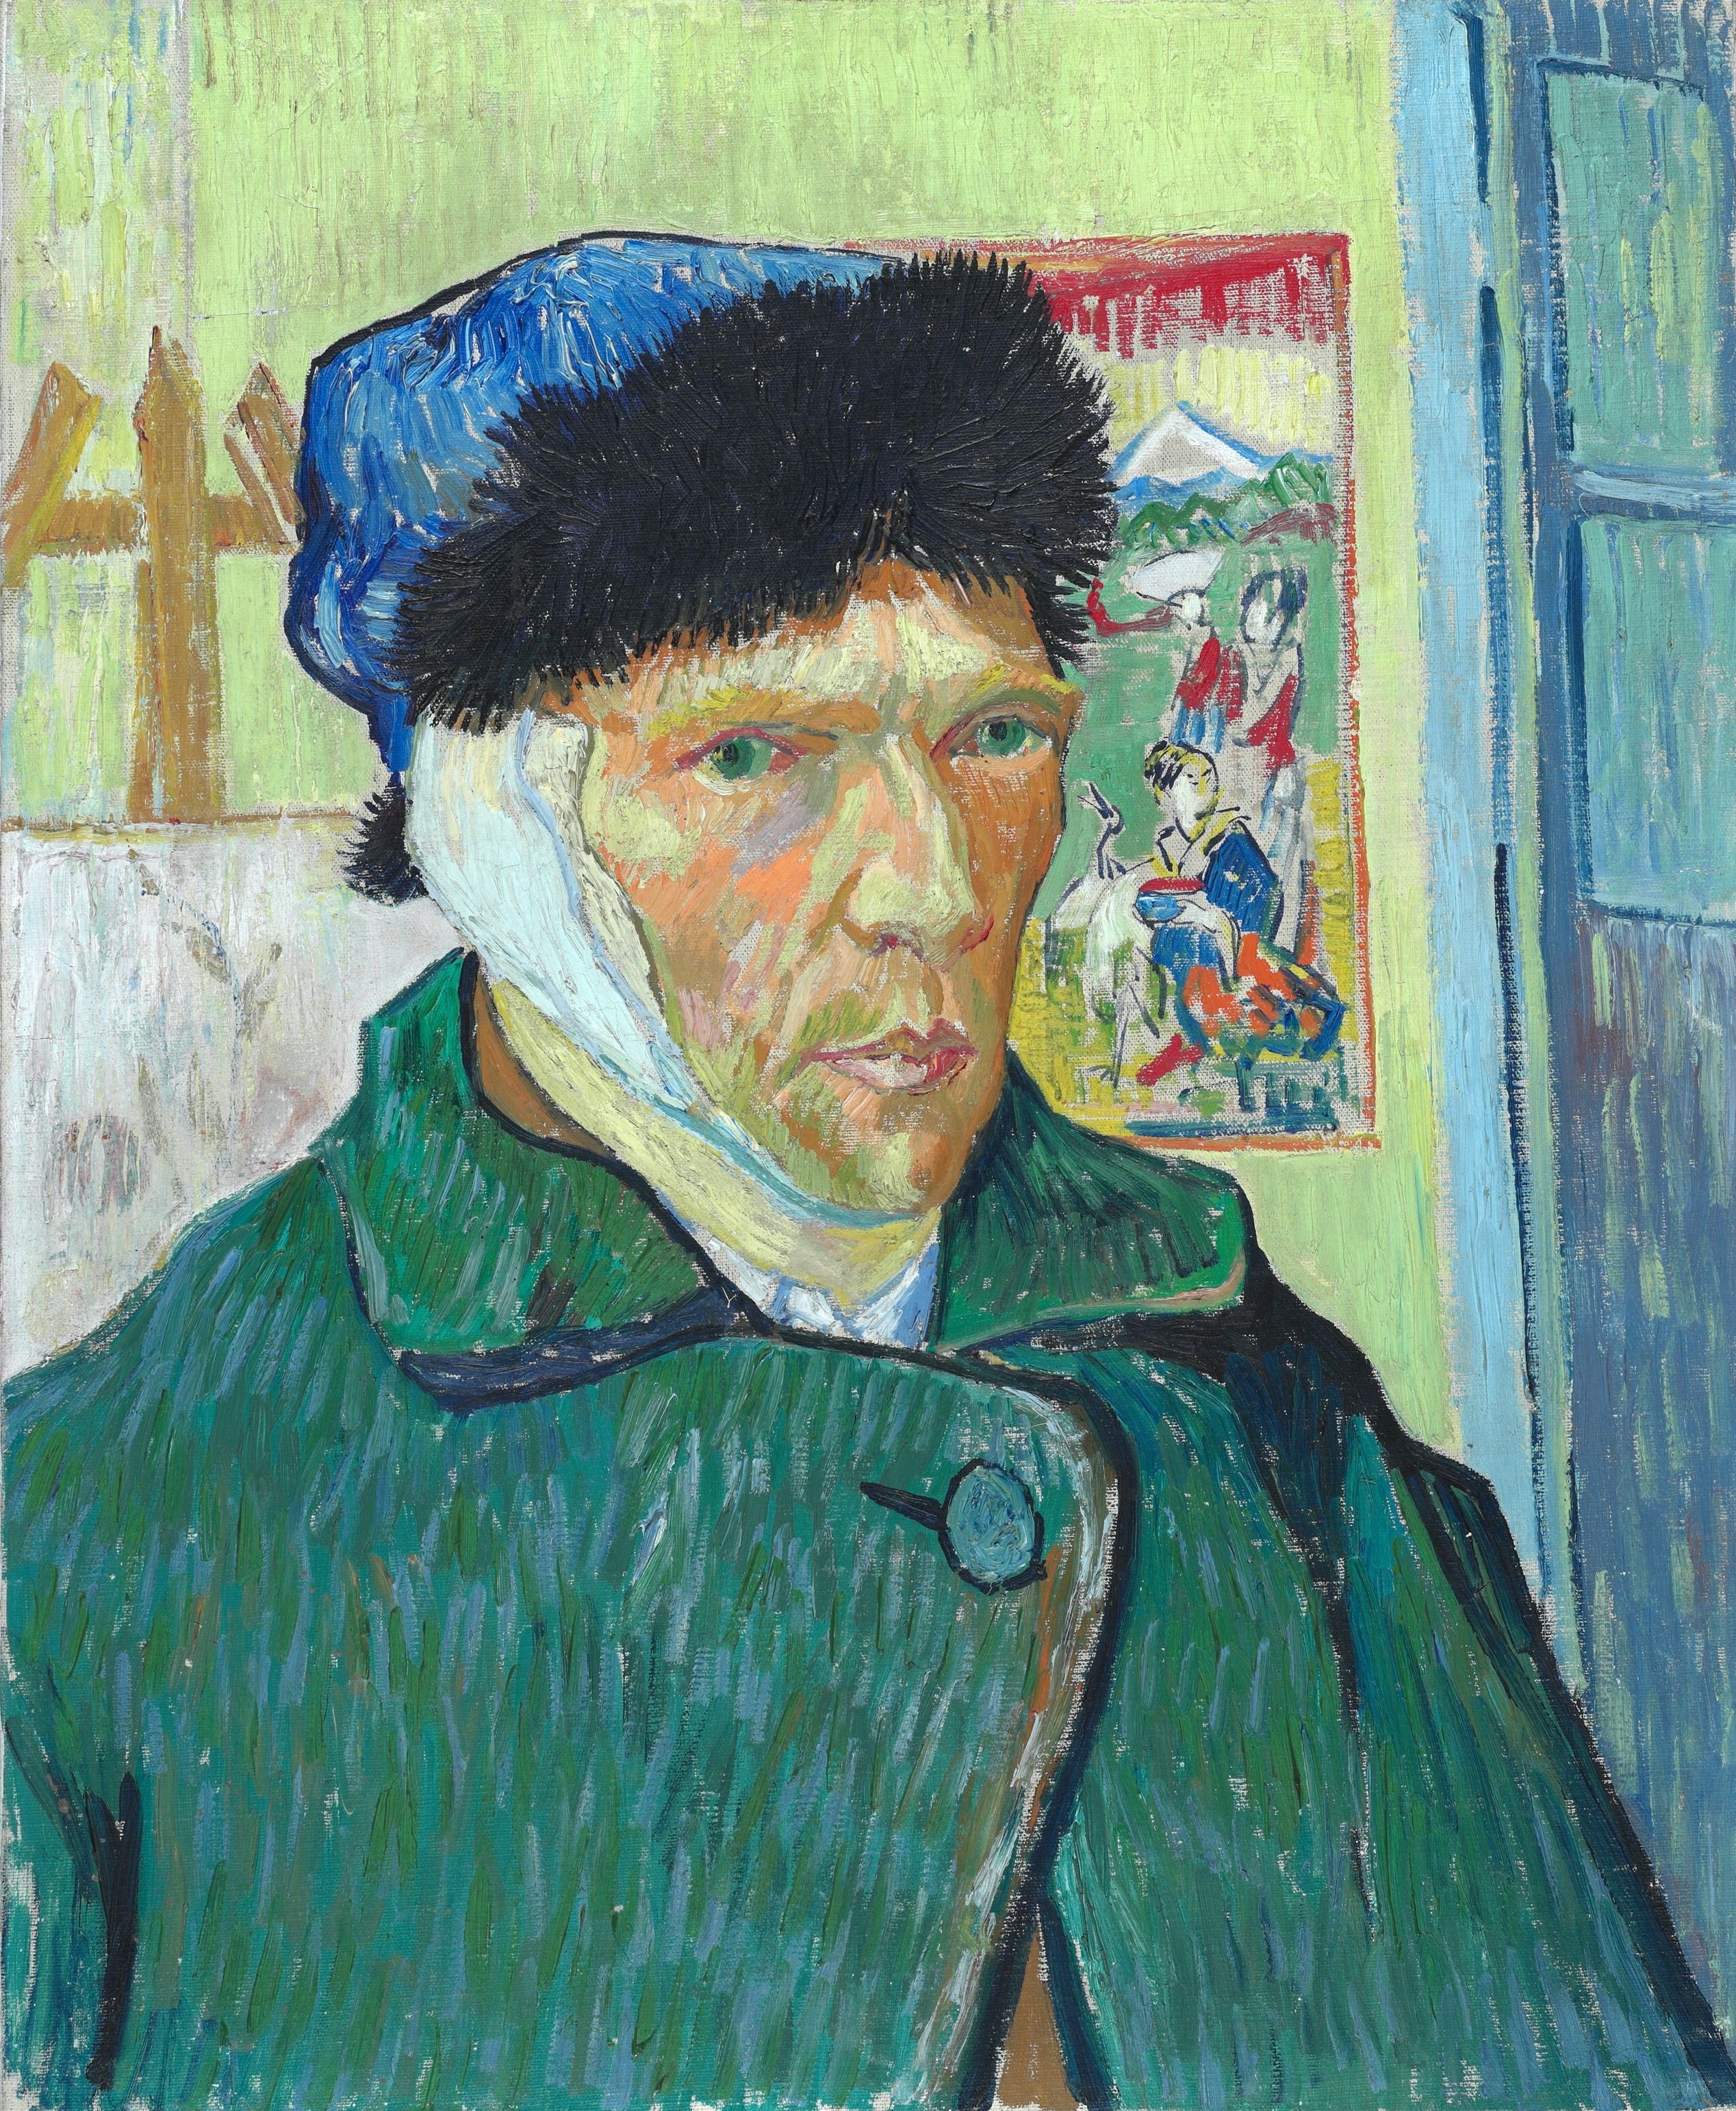 a painting of a man with a bandage on his face.